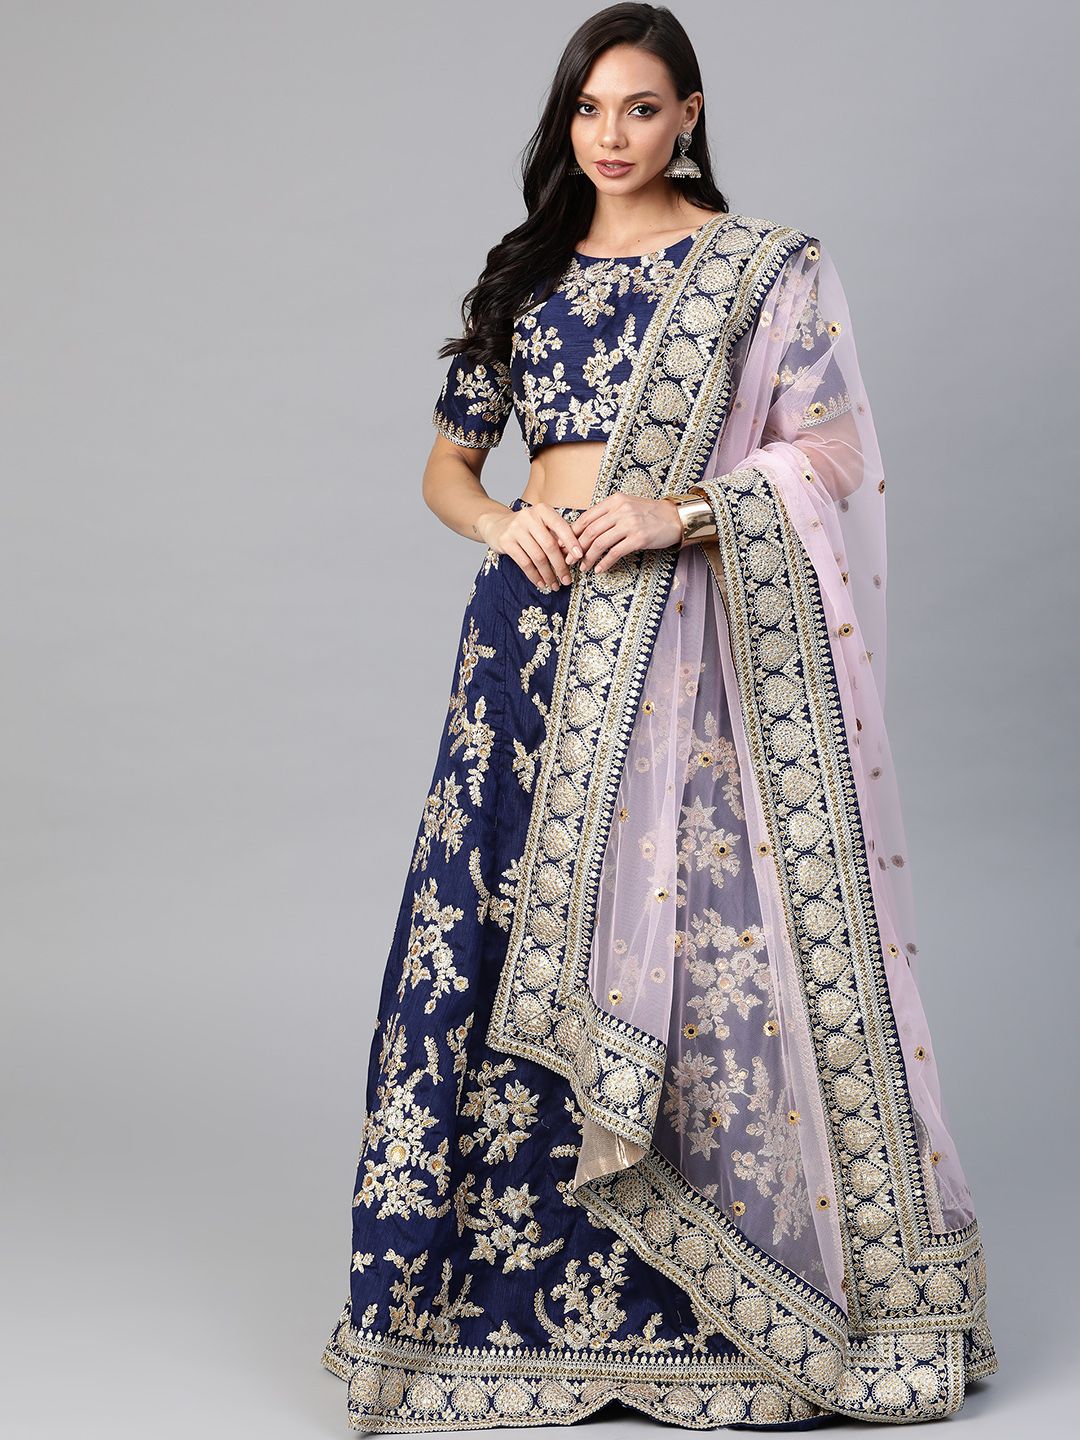 SHUBHVASTRA Navy Blue & White Embroidered Sequinned Semi-Stitched Lehenga & Unstitched Blouse With Dupatta Price in India